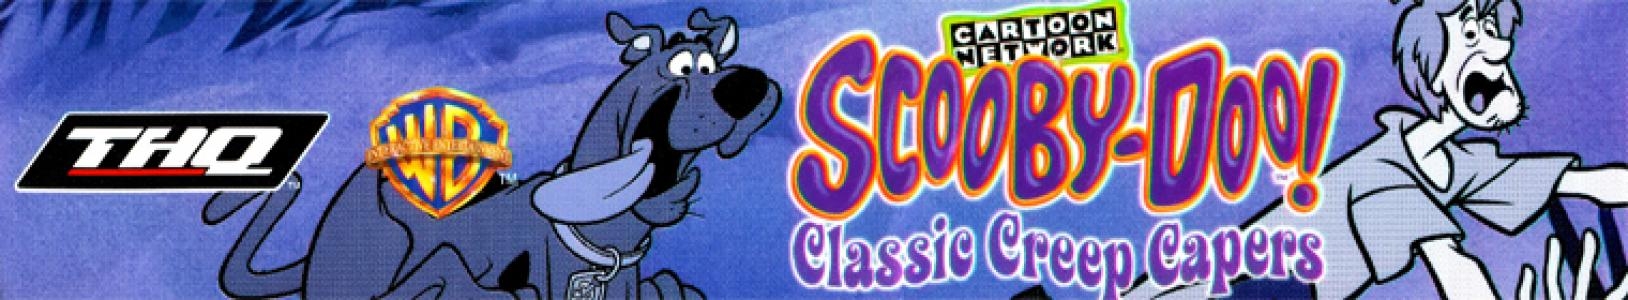 Scooby-Doo! Classic Creep Capers banner